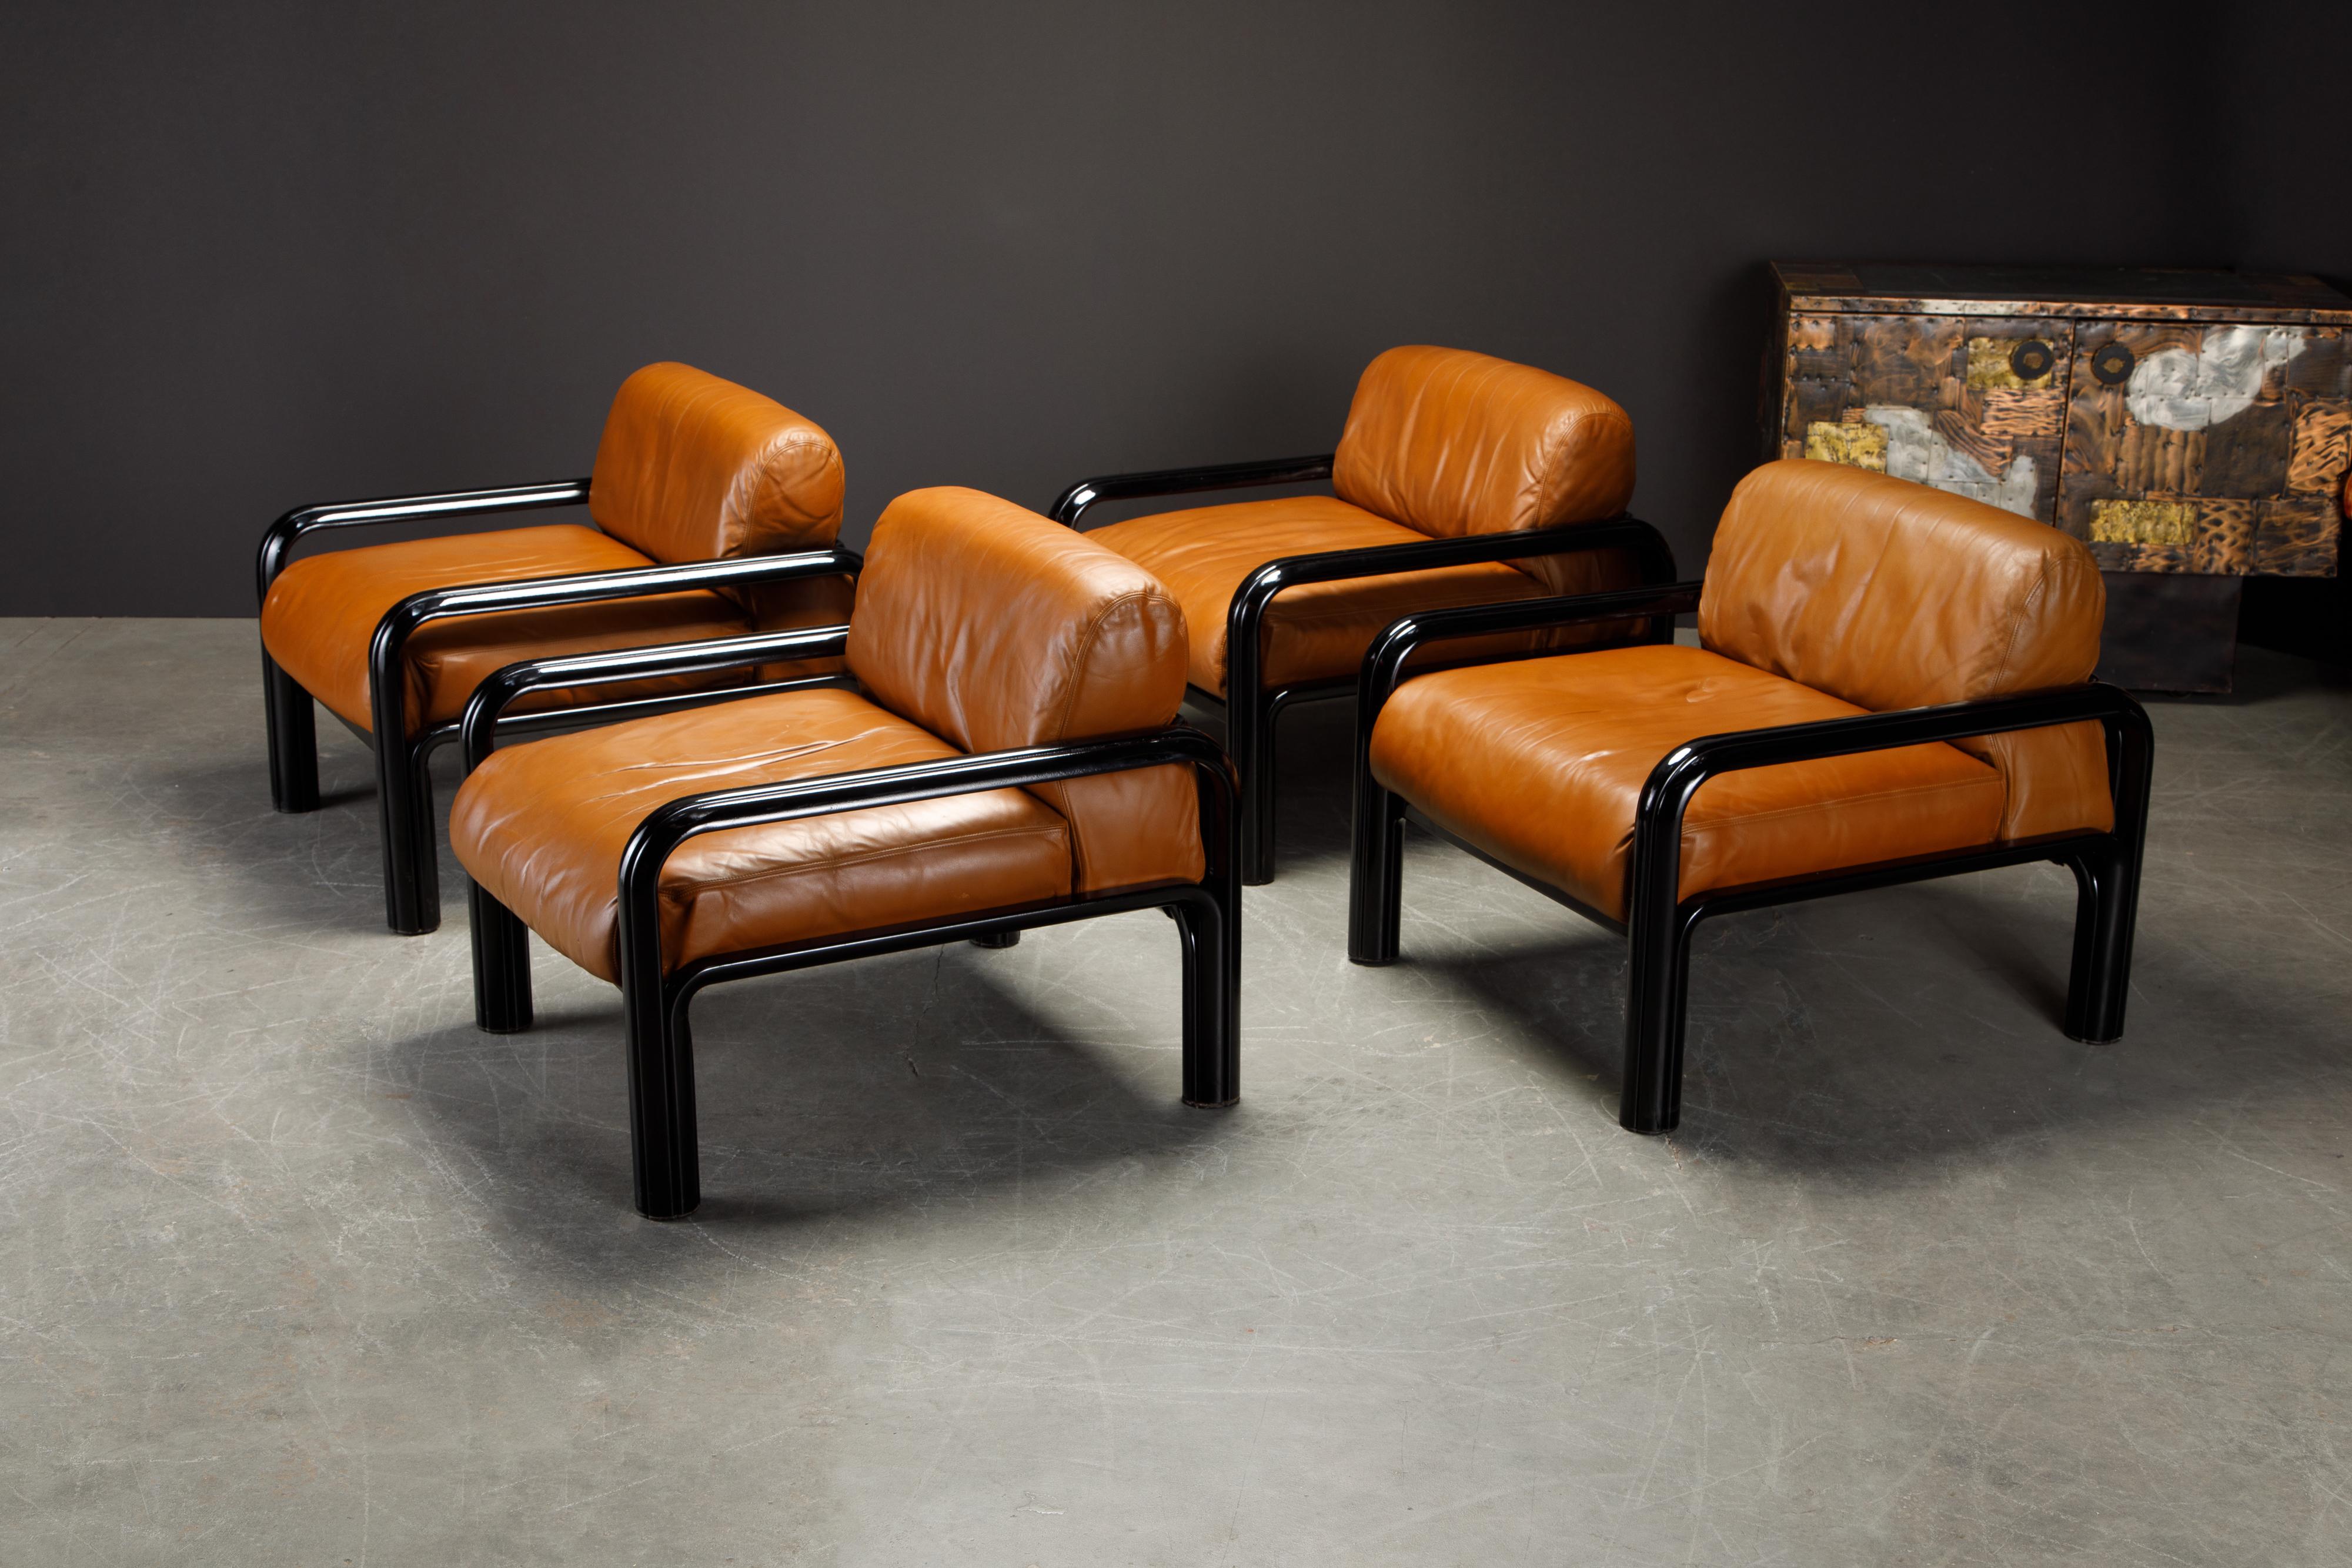 Modern Set of 4 Gae Aulenti Leather and Steel Lounge Chairs for Knoll, Signed 1980